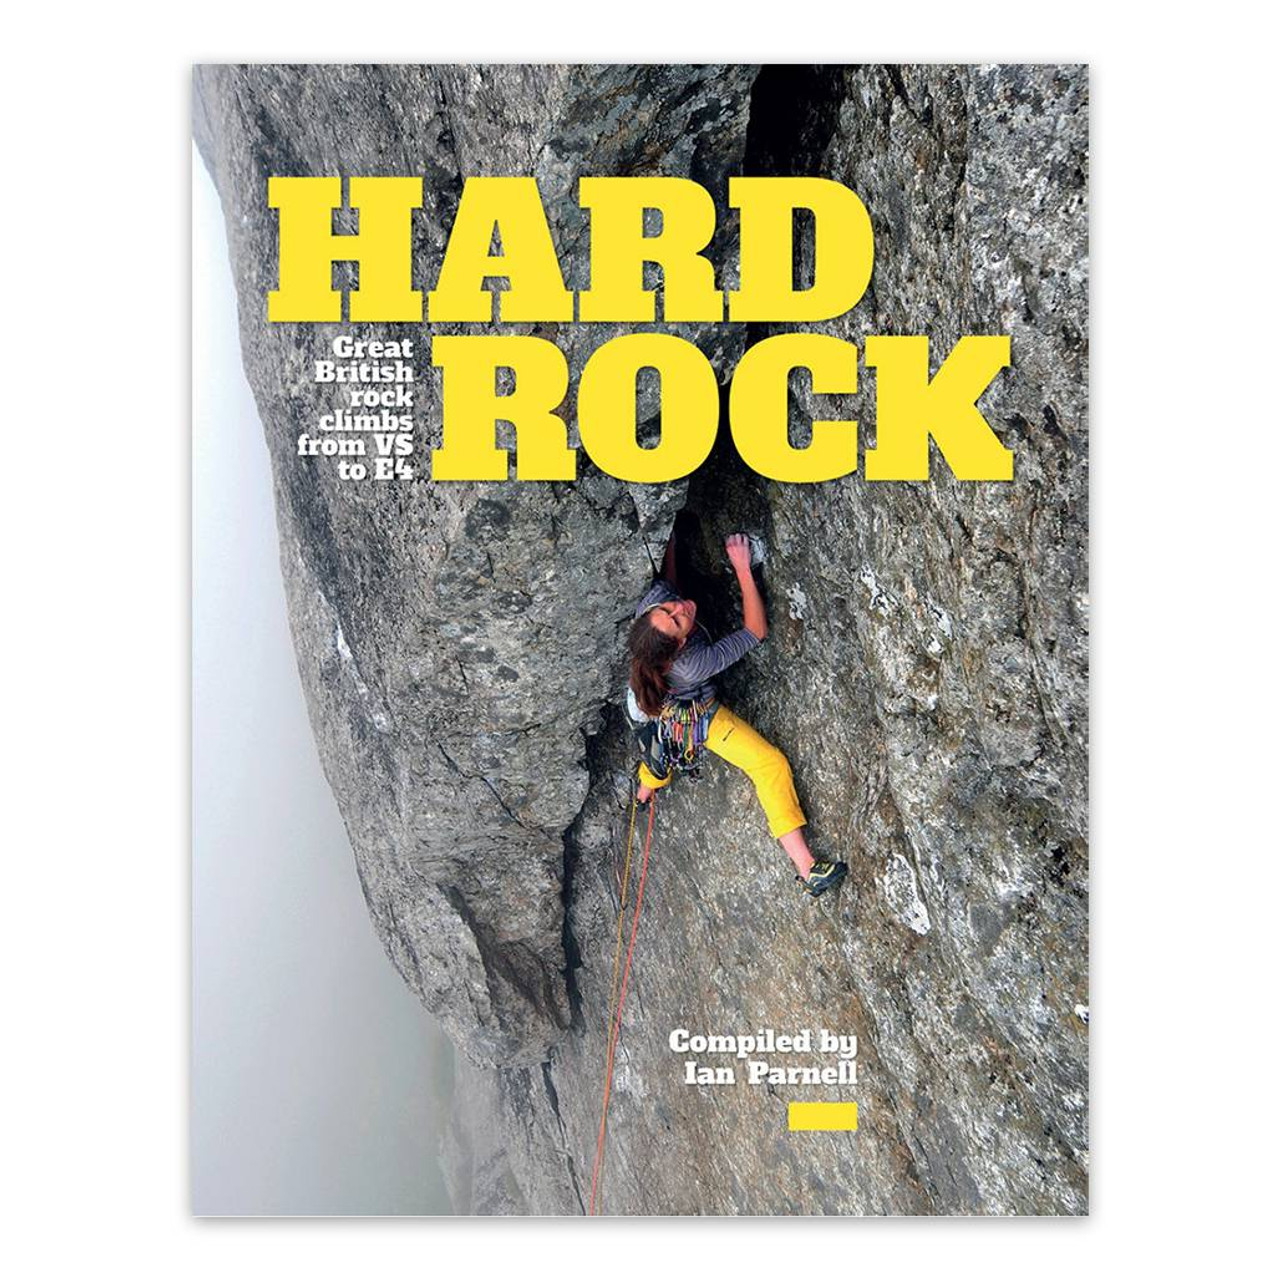 Hard Rock - Great British Rock Climbs From Vs To E4